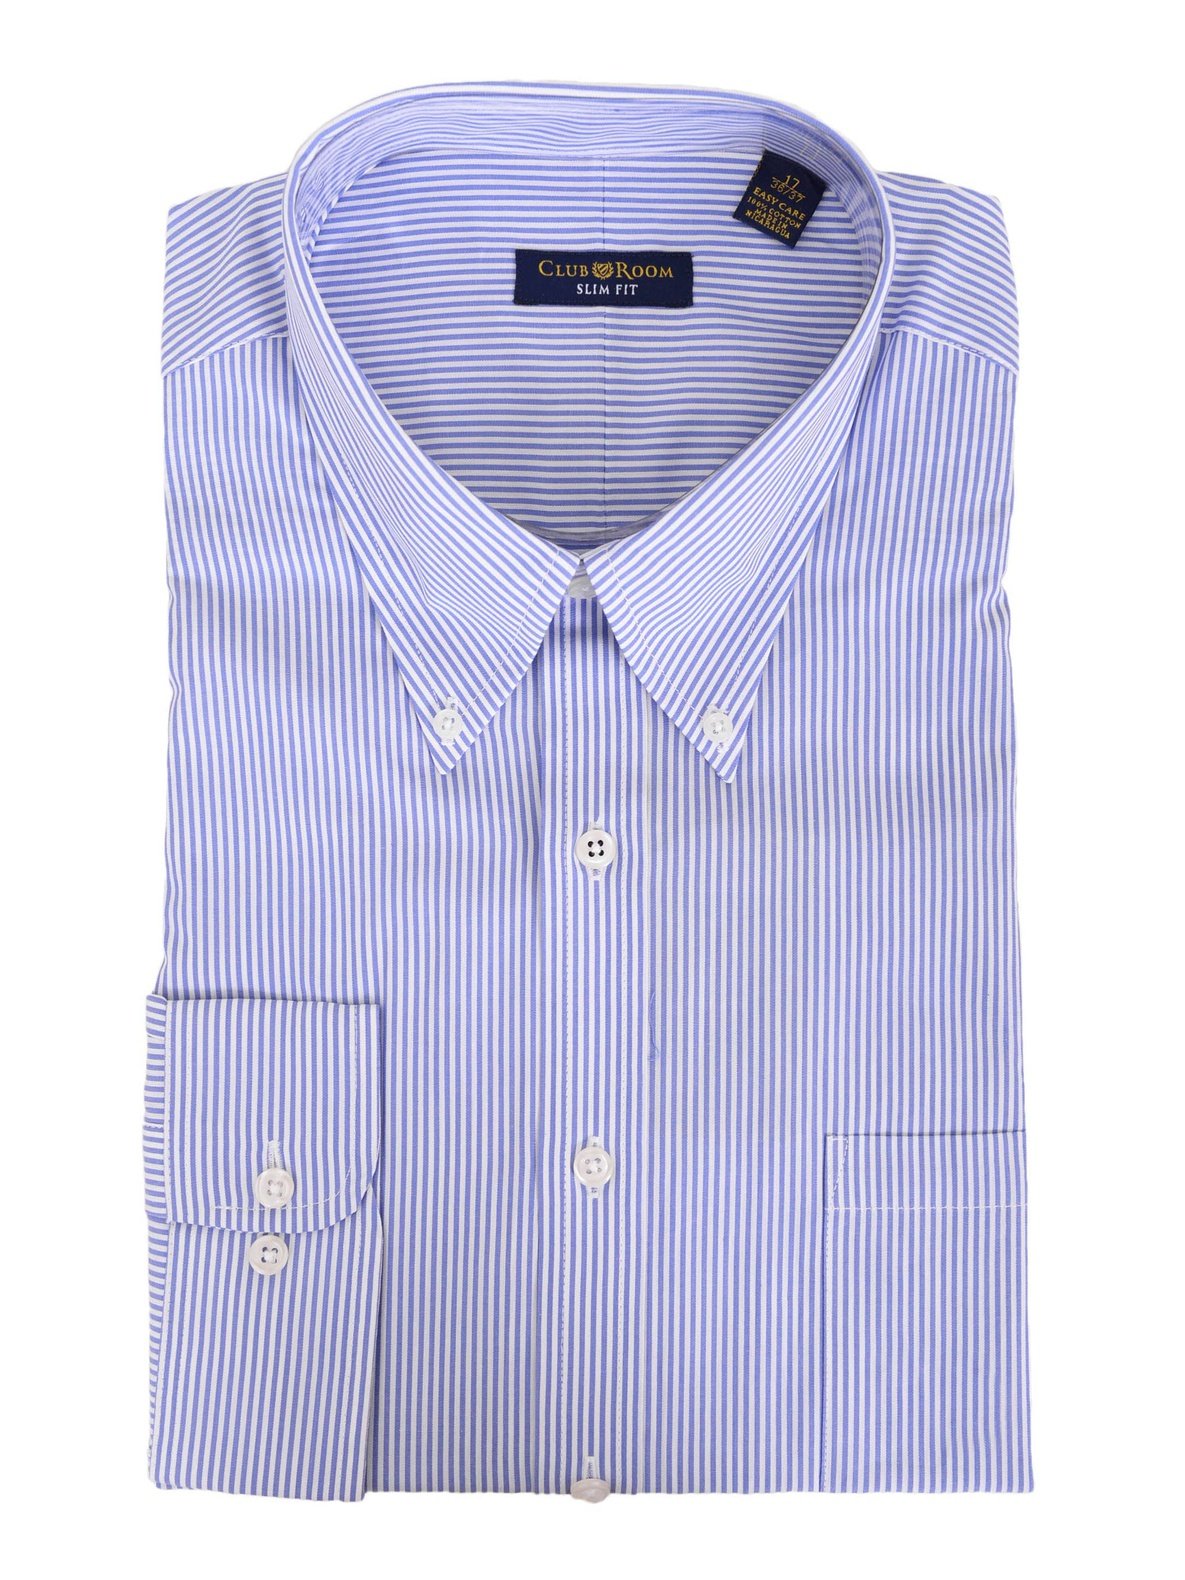 Club Room Slim Fit Blue Striped Button Down Collar Easy Care Cotton Dress  Shirt